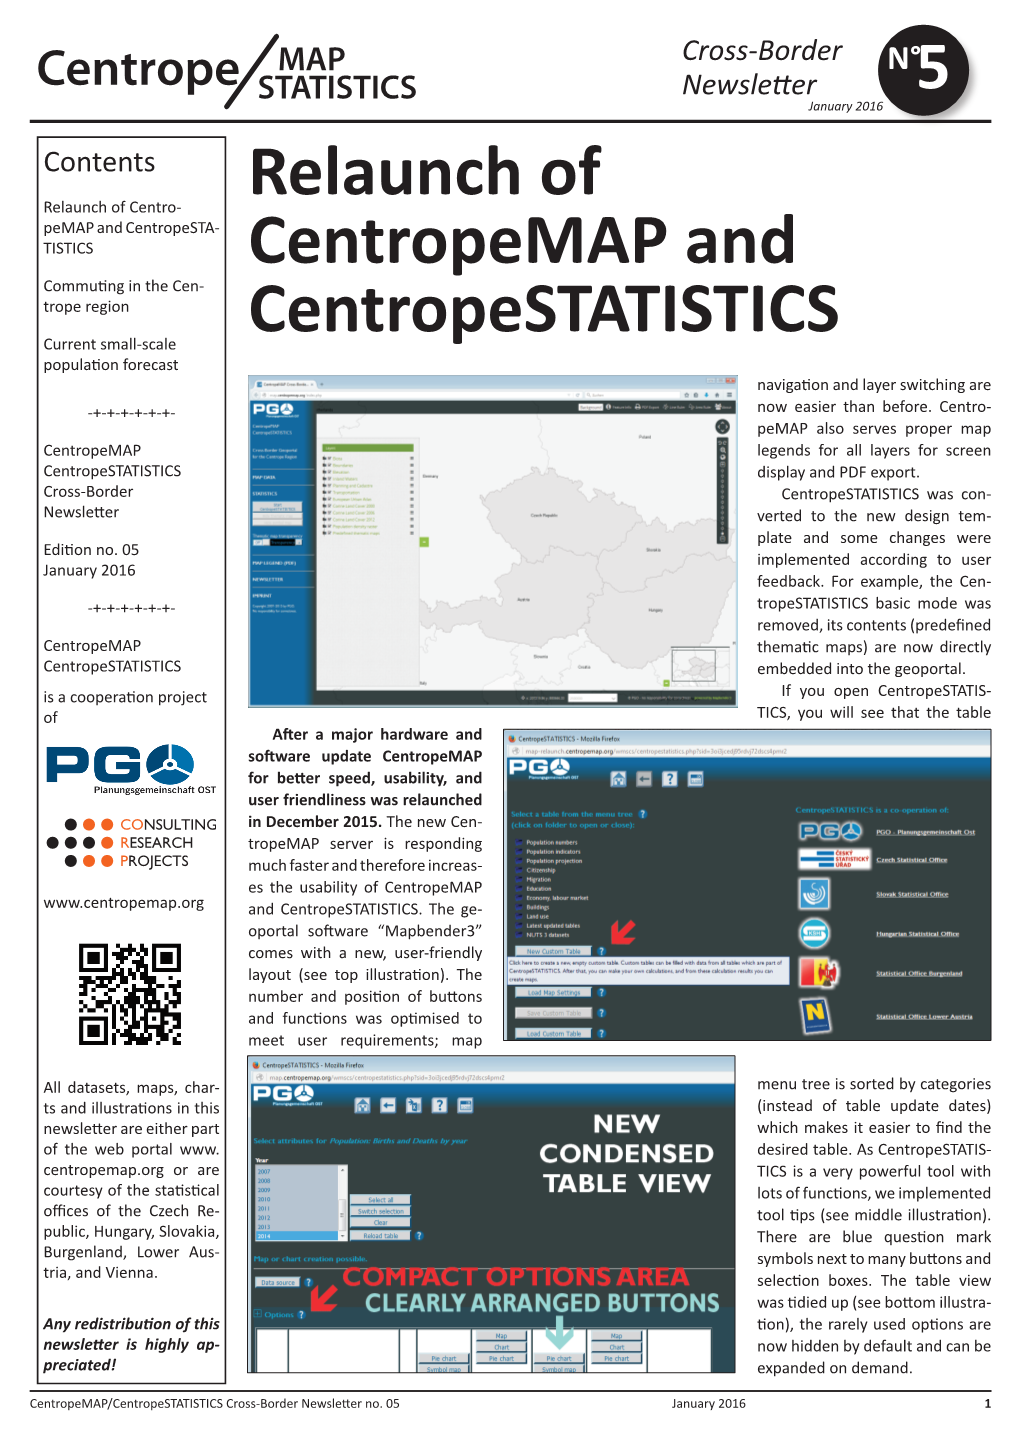 Relaunch of Centropemap and Centropestatistics